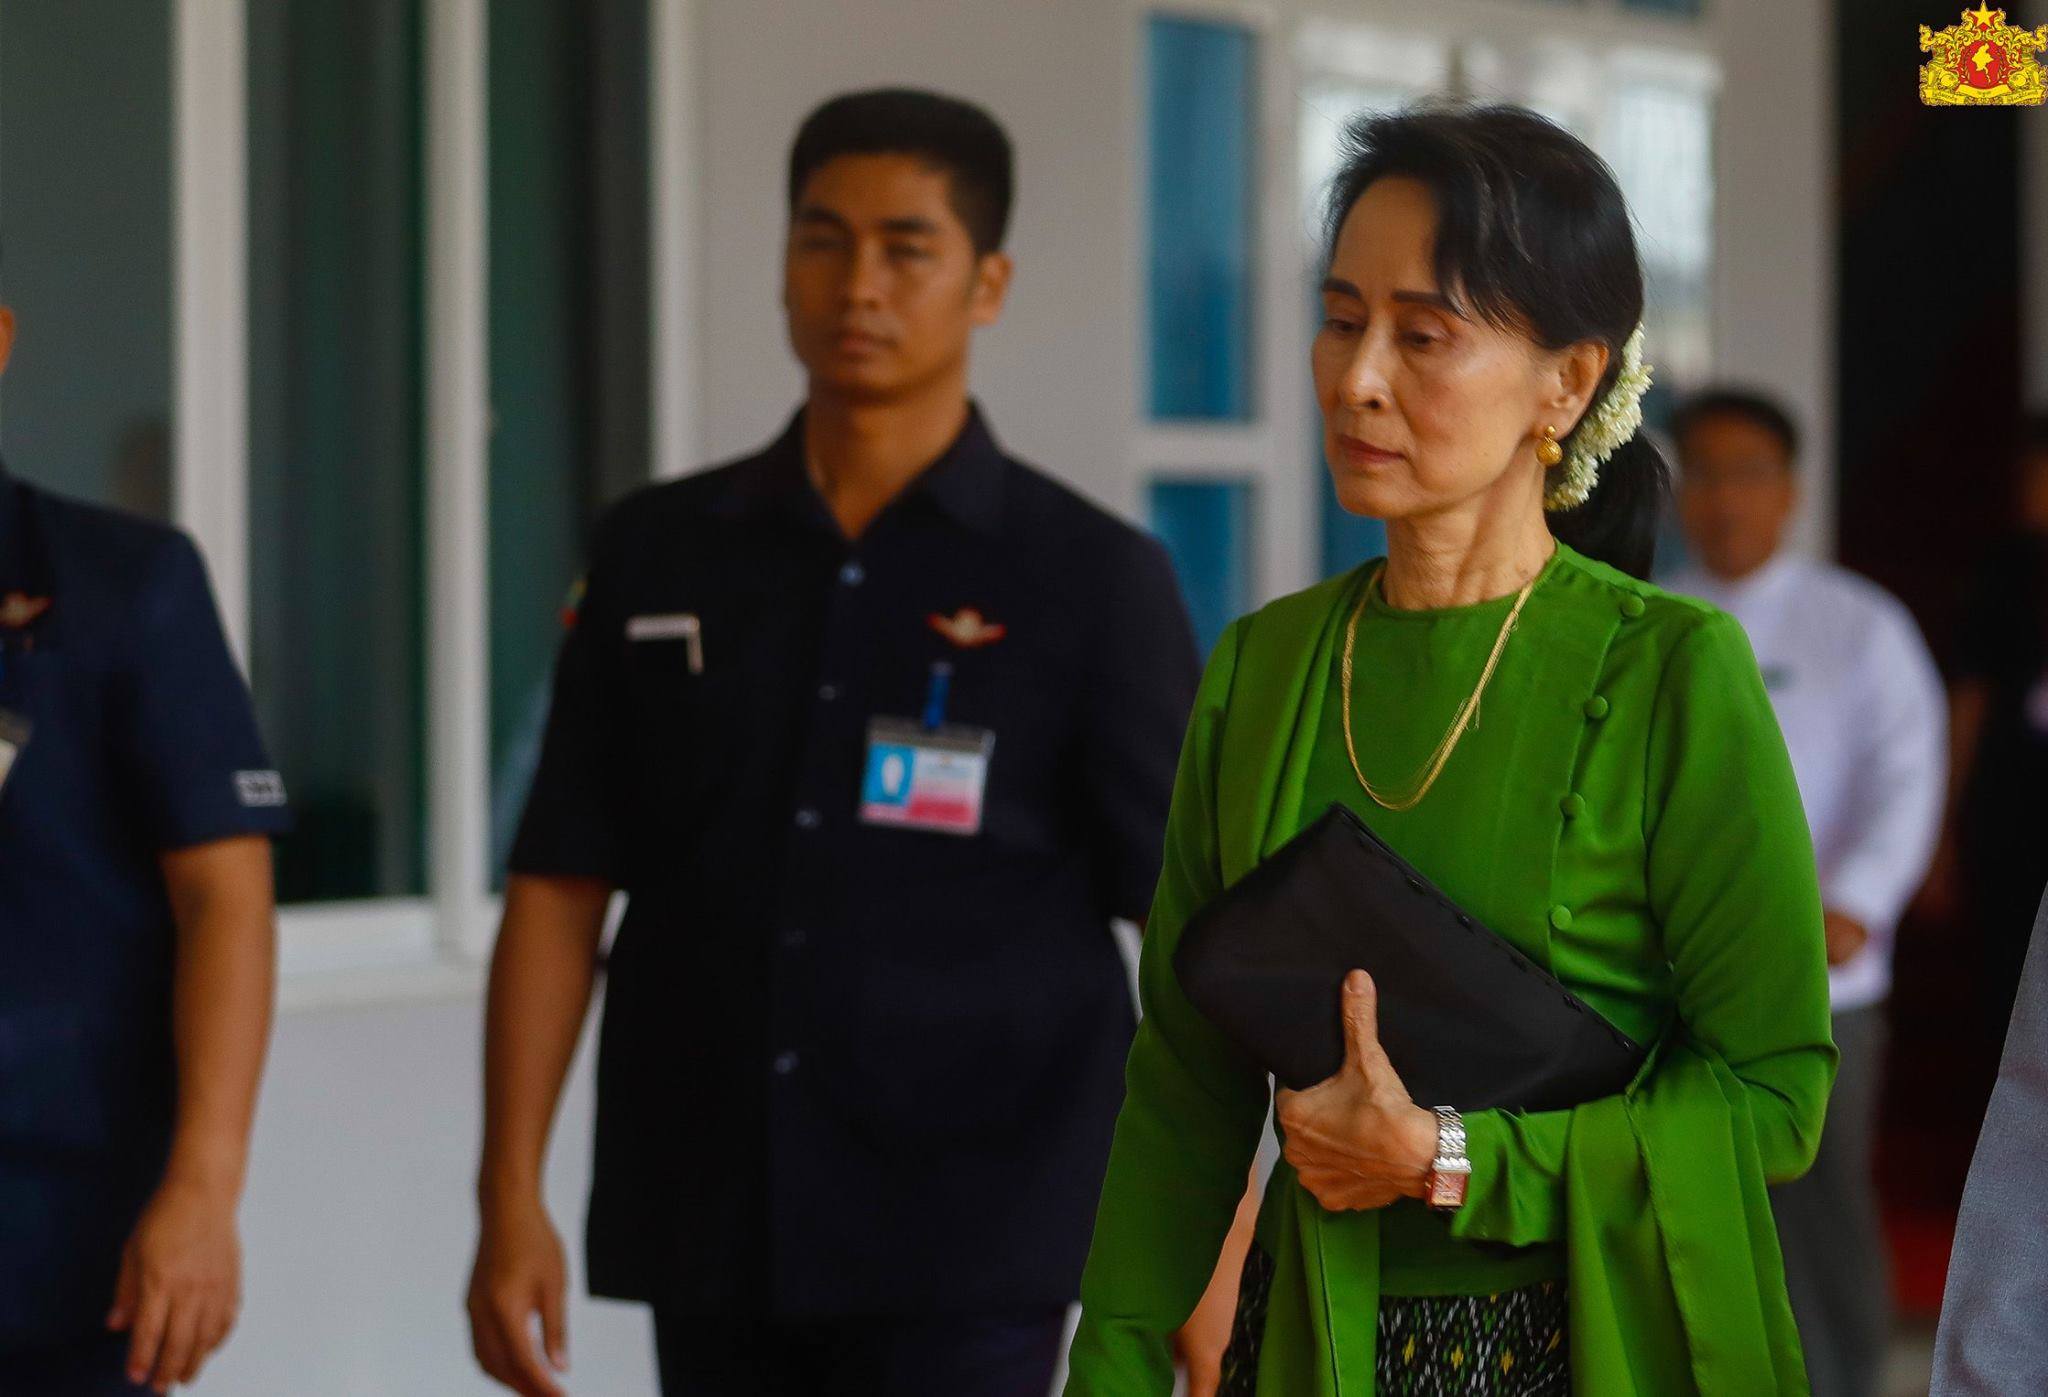 Aung San Suu Kyi prepares to meet with military officials in Naypyidaw on August 25. Photo: Information Committee